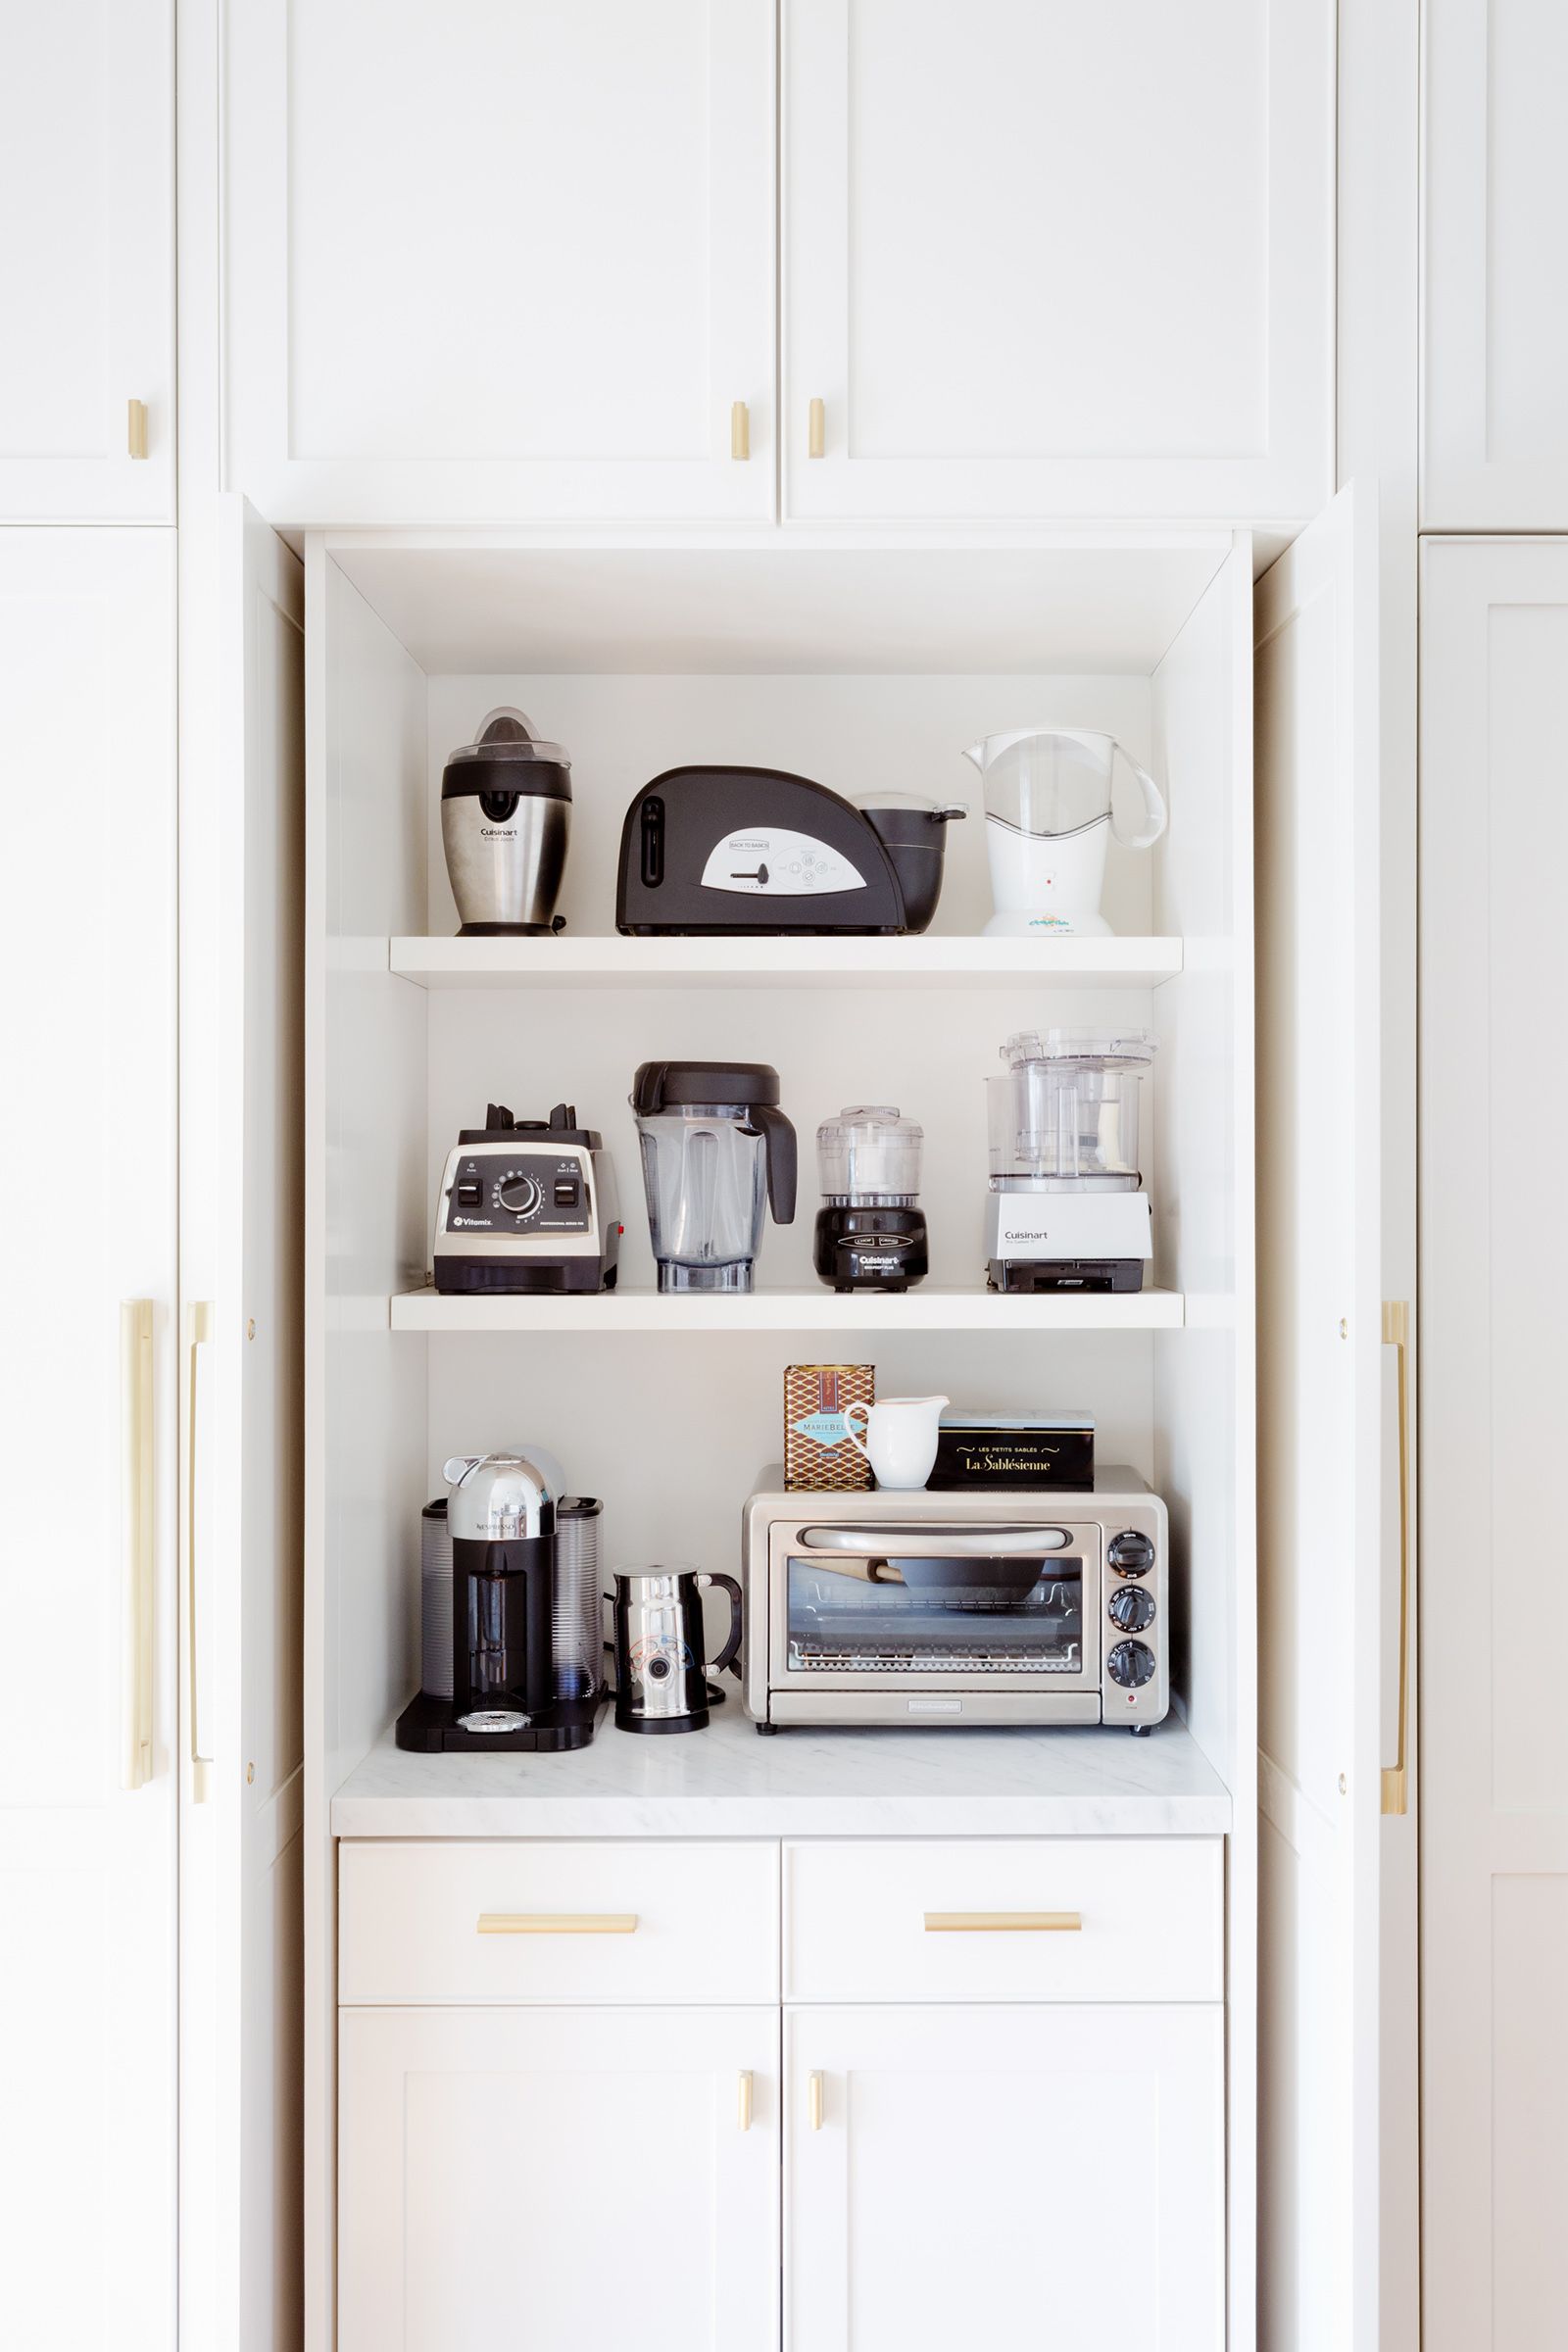 Appliance Garage Cabinets Are Back With a Sophisticated Twist